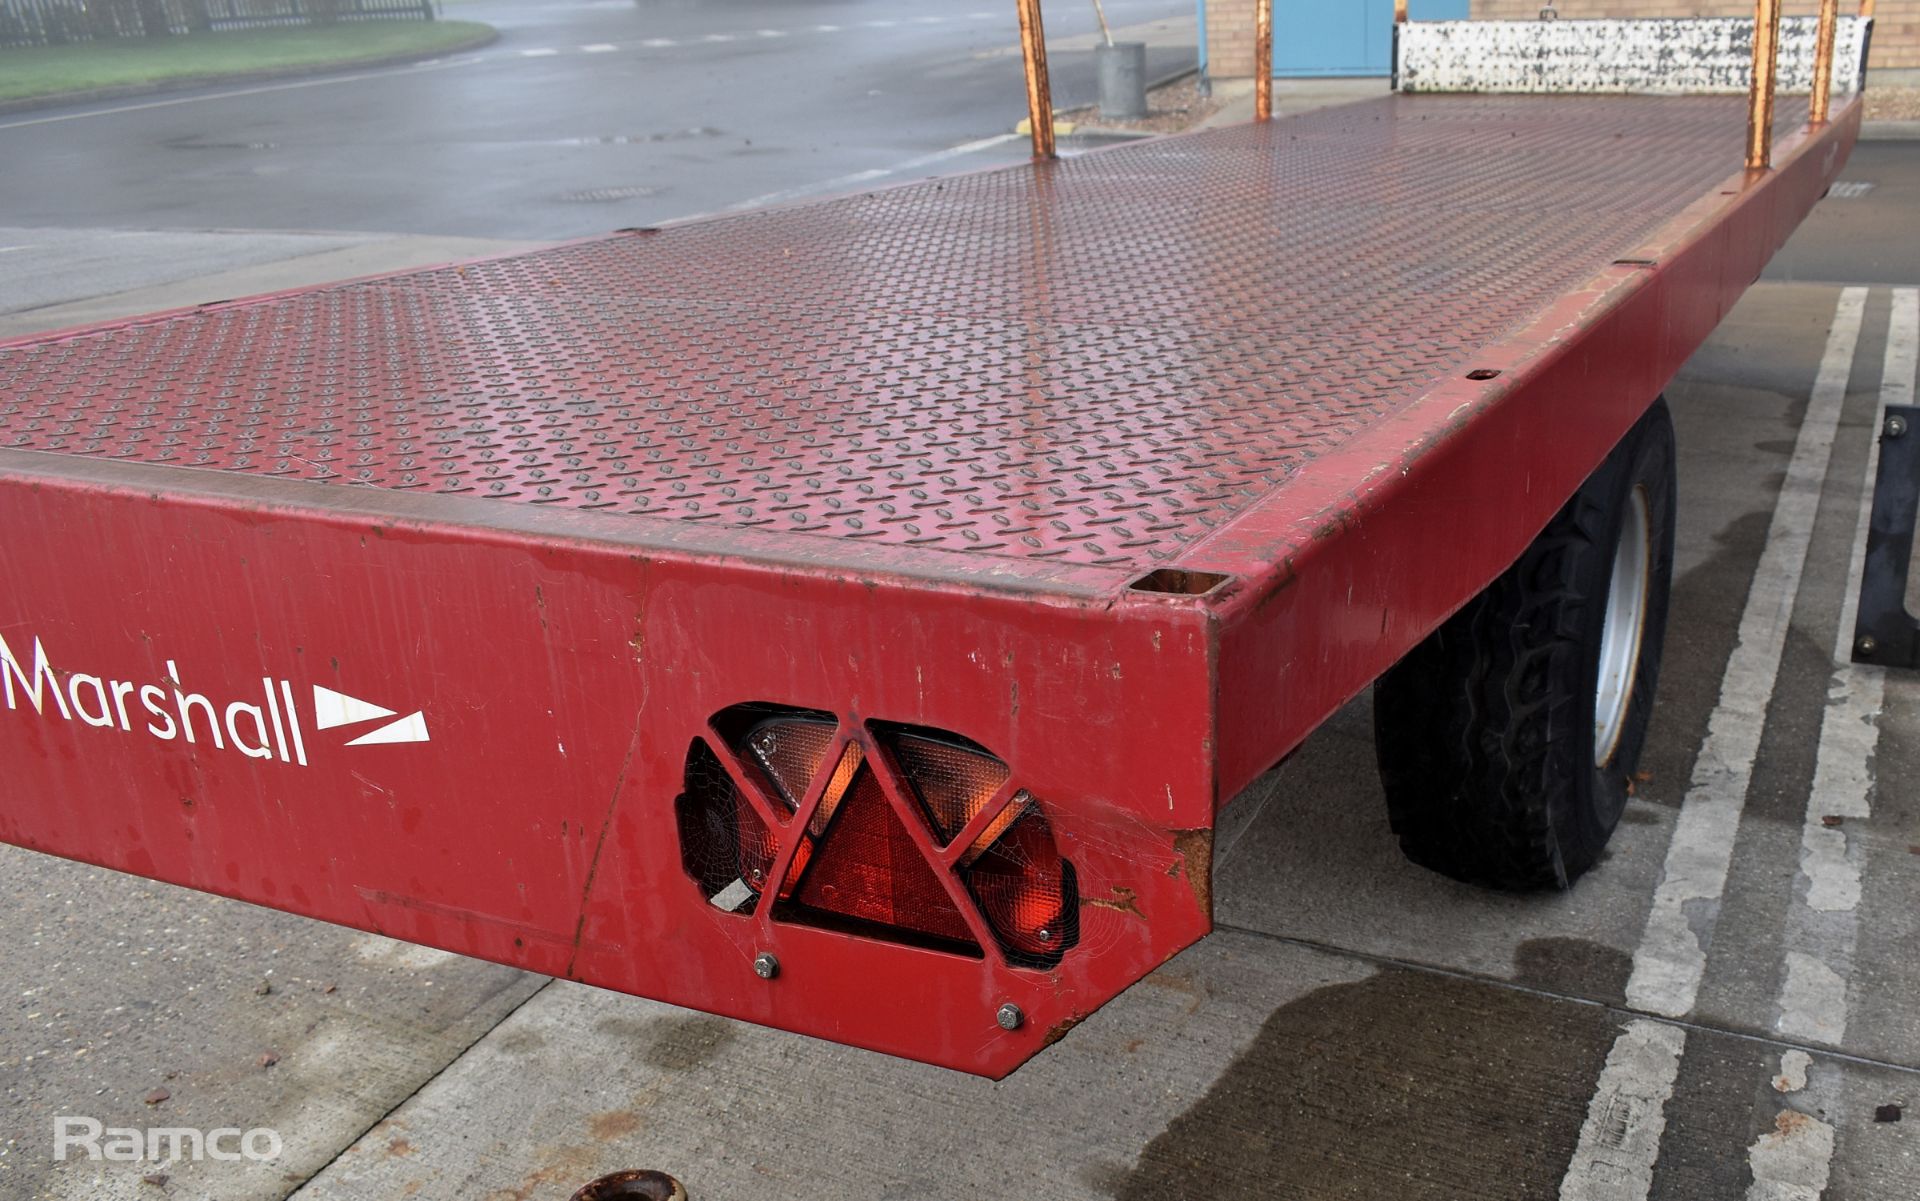 Marshall BC18N 2019 single axle flatbed trailer - 5000kg carrying capacity - serial number 107532 - Bild 11 aus 11